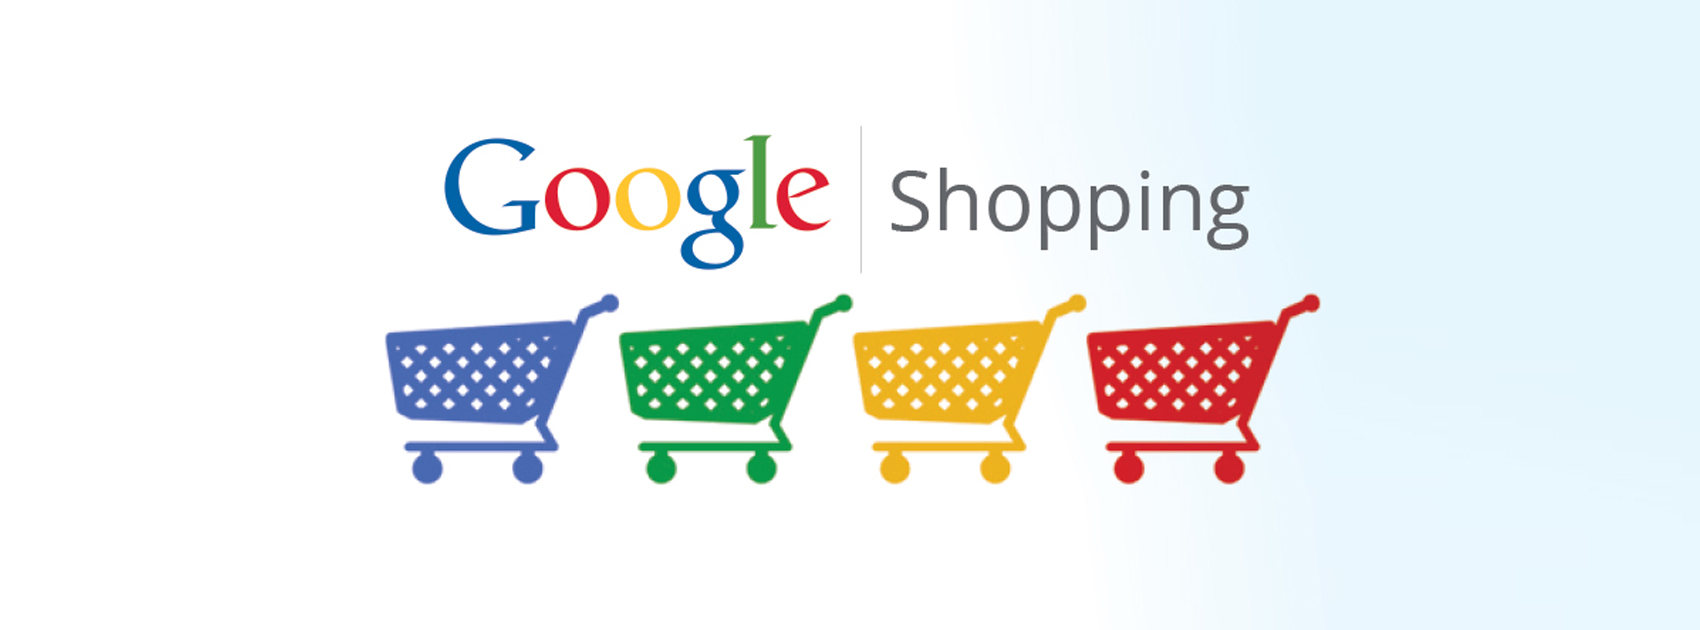 Google Publishes New Sensible Information for Ecommerce